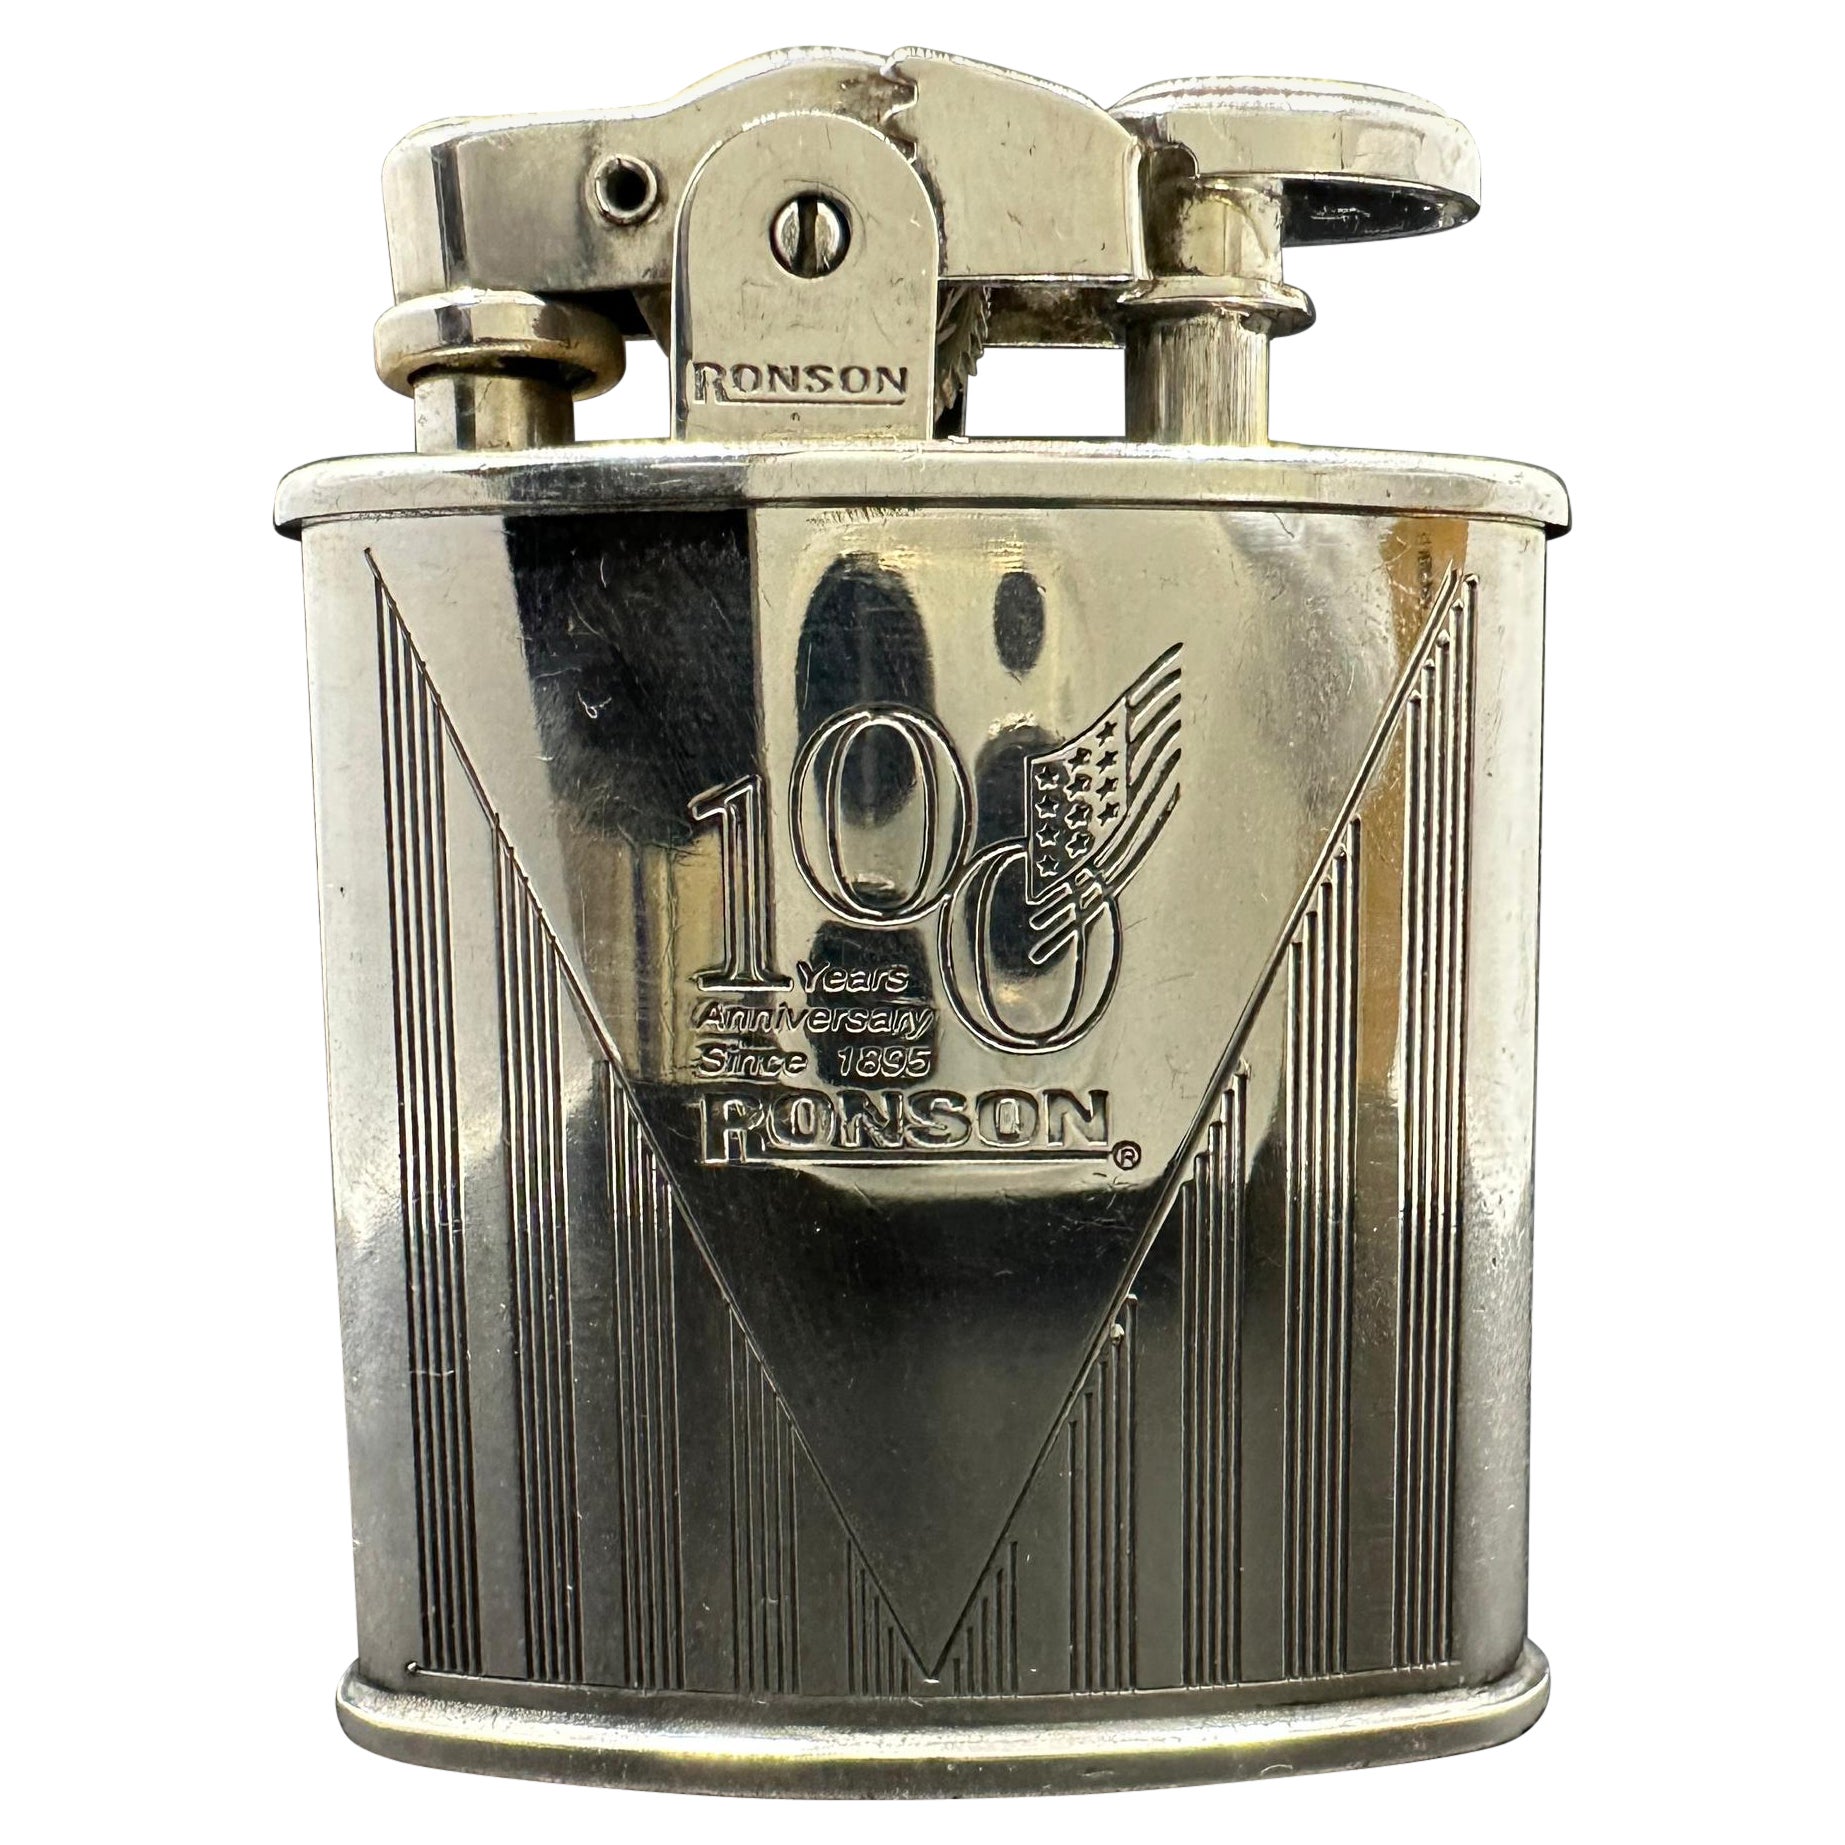 Ronson “1943” Limited Edition 100 Year Anniversary Silver Plated Vintage Lighter